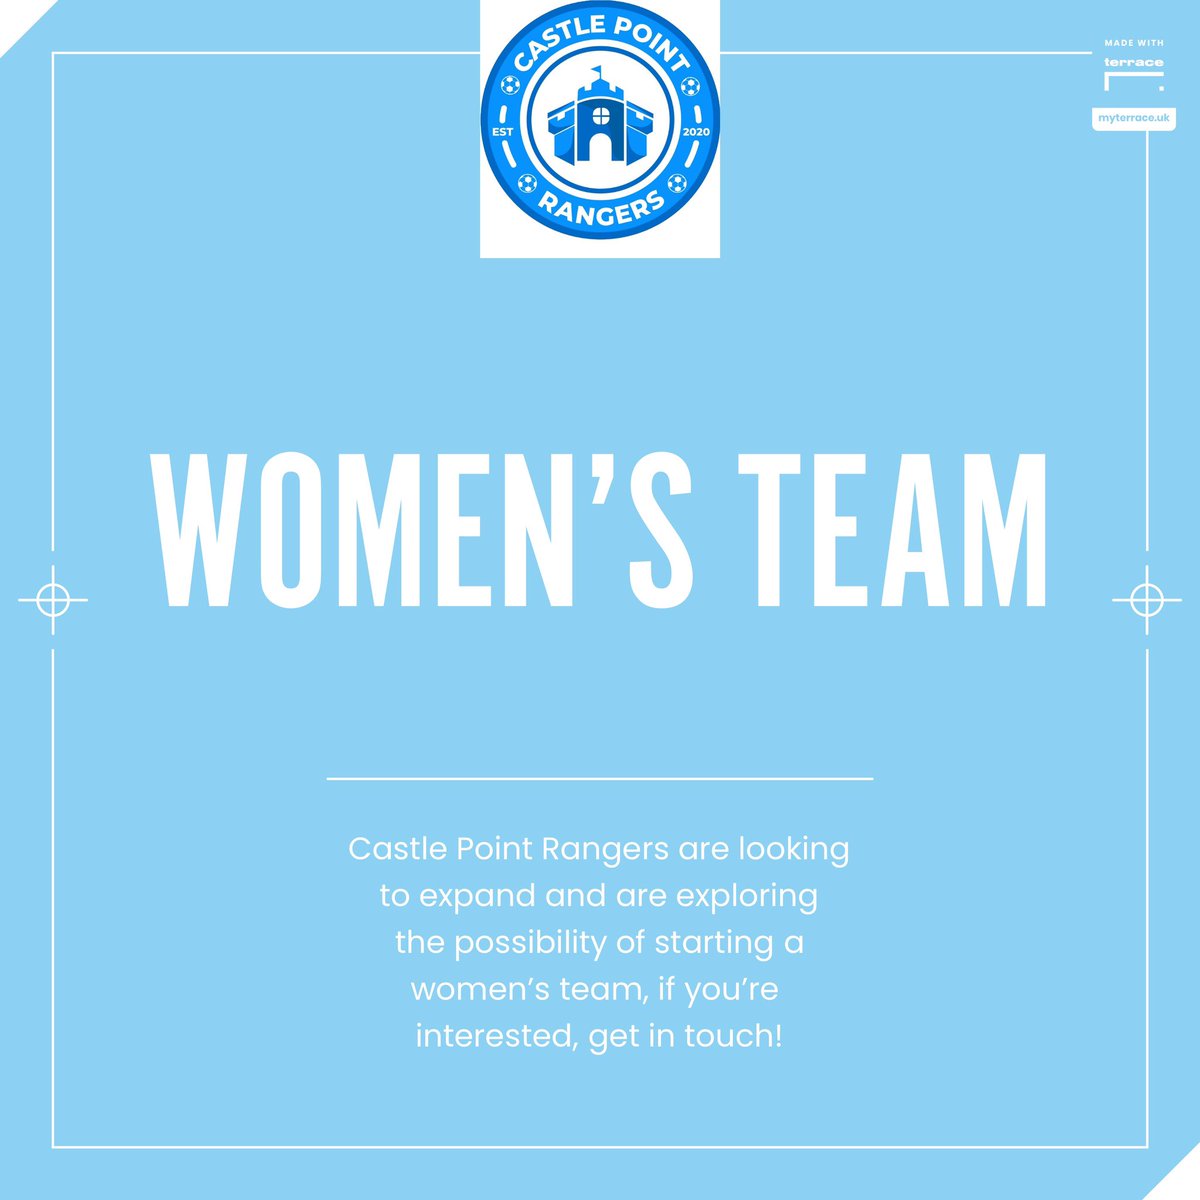 🚨🚨🚨Announcement 🚨🚨🚨 We’re exploring the idea of starting a women’s team for the 24/25 season! But we’d need to know if there is enough interest from players to do so. So if you’re interested slide into our DMs ✉️ Or drop a comment 👇 🏰🏰🏰🏰🏰🏰🏰🏰🏰🏰🏰🏰🏰